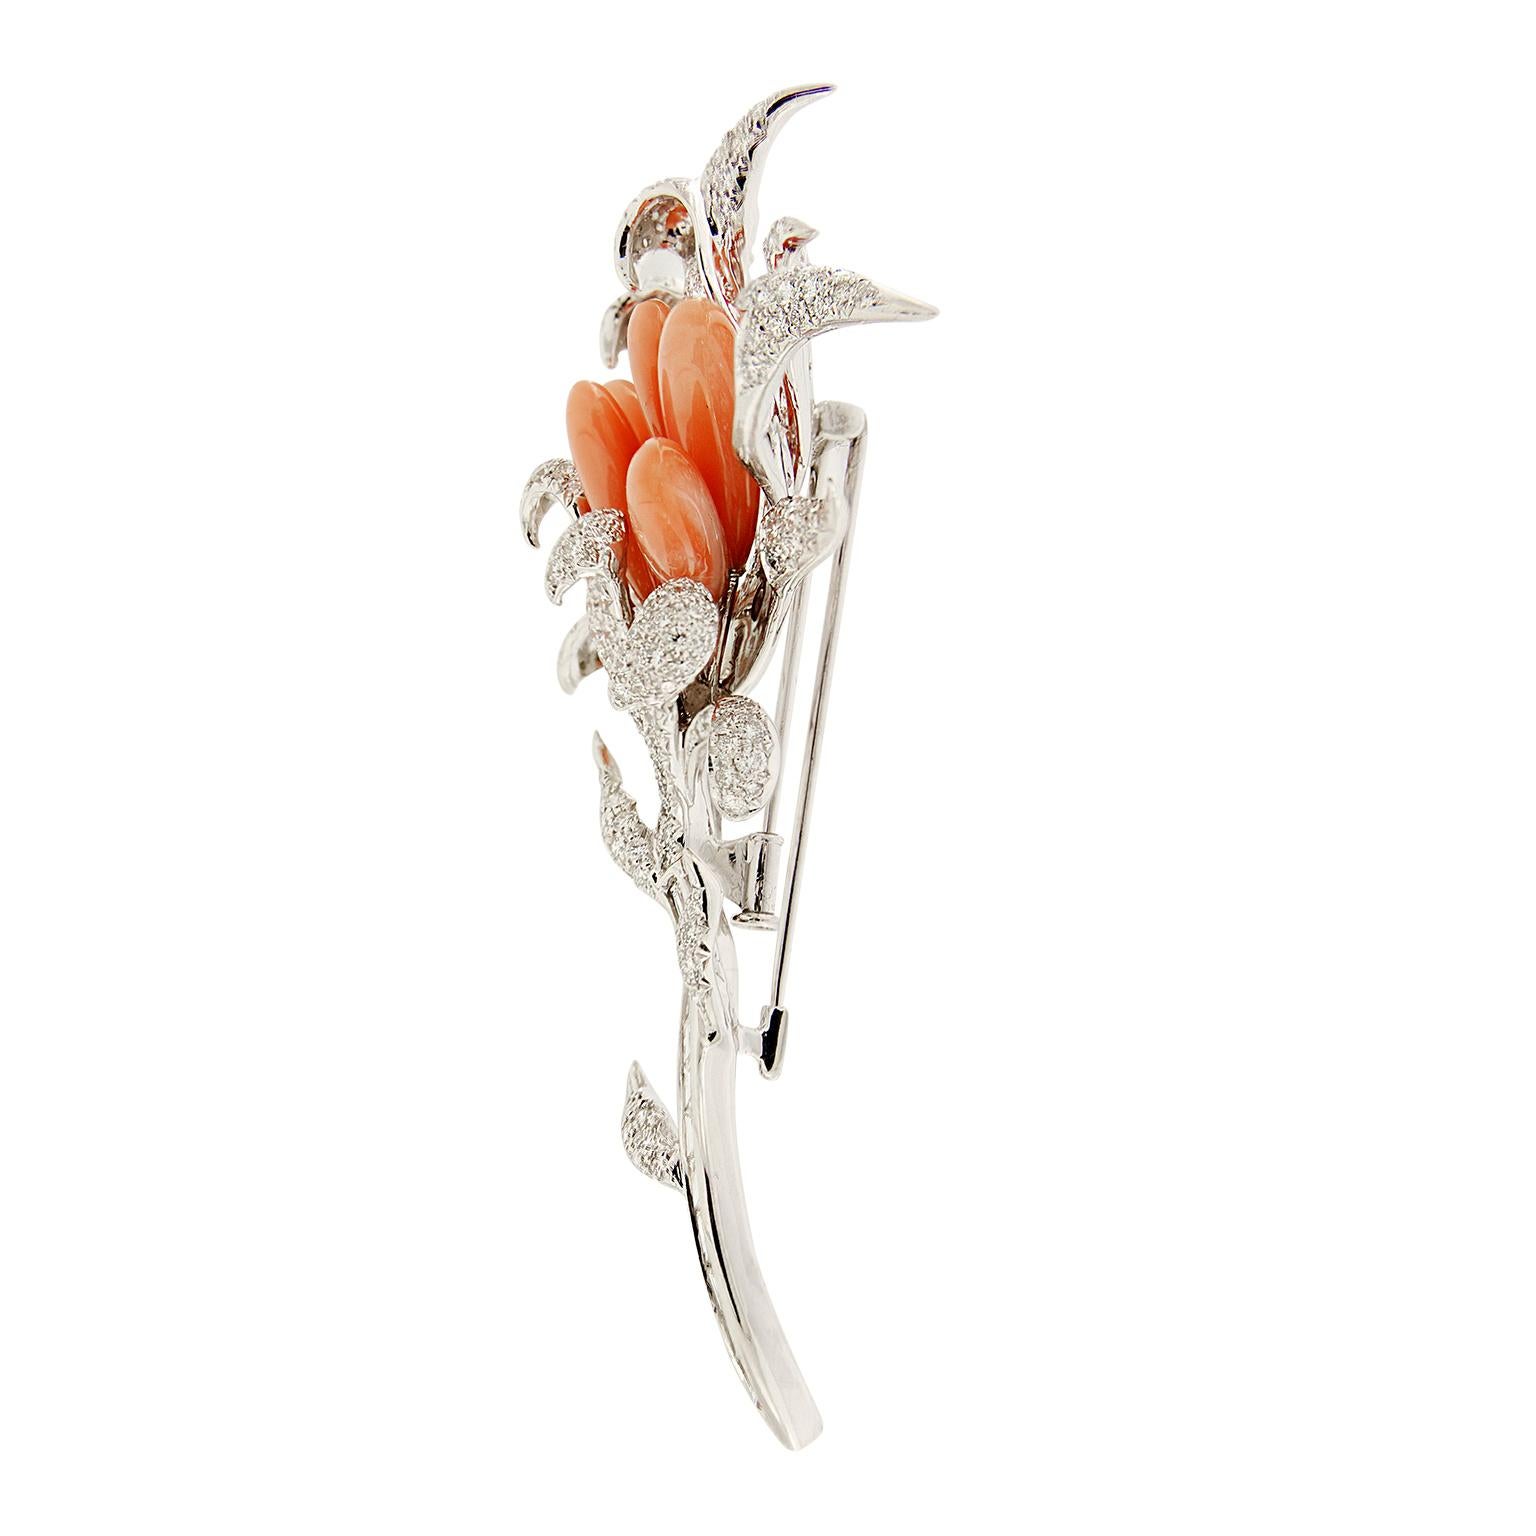 Valentin Magro Windblown Diamond and Coral Brooch seems to dance in the breeze. Pave set round brilliant cut diamonds come together to form leaves and petals. Pink coral carved into drop shapes fill in the blossom's center. Channel set baguette cut